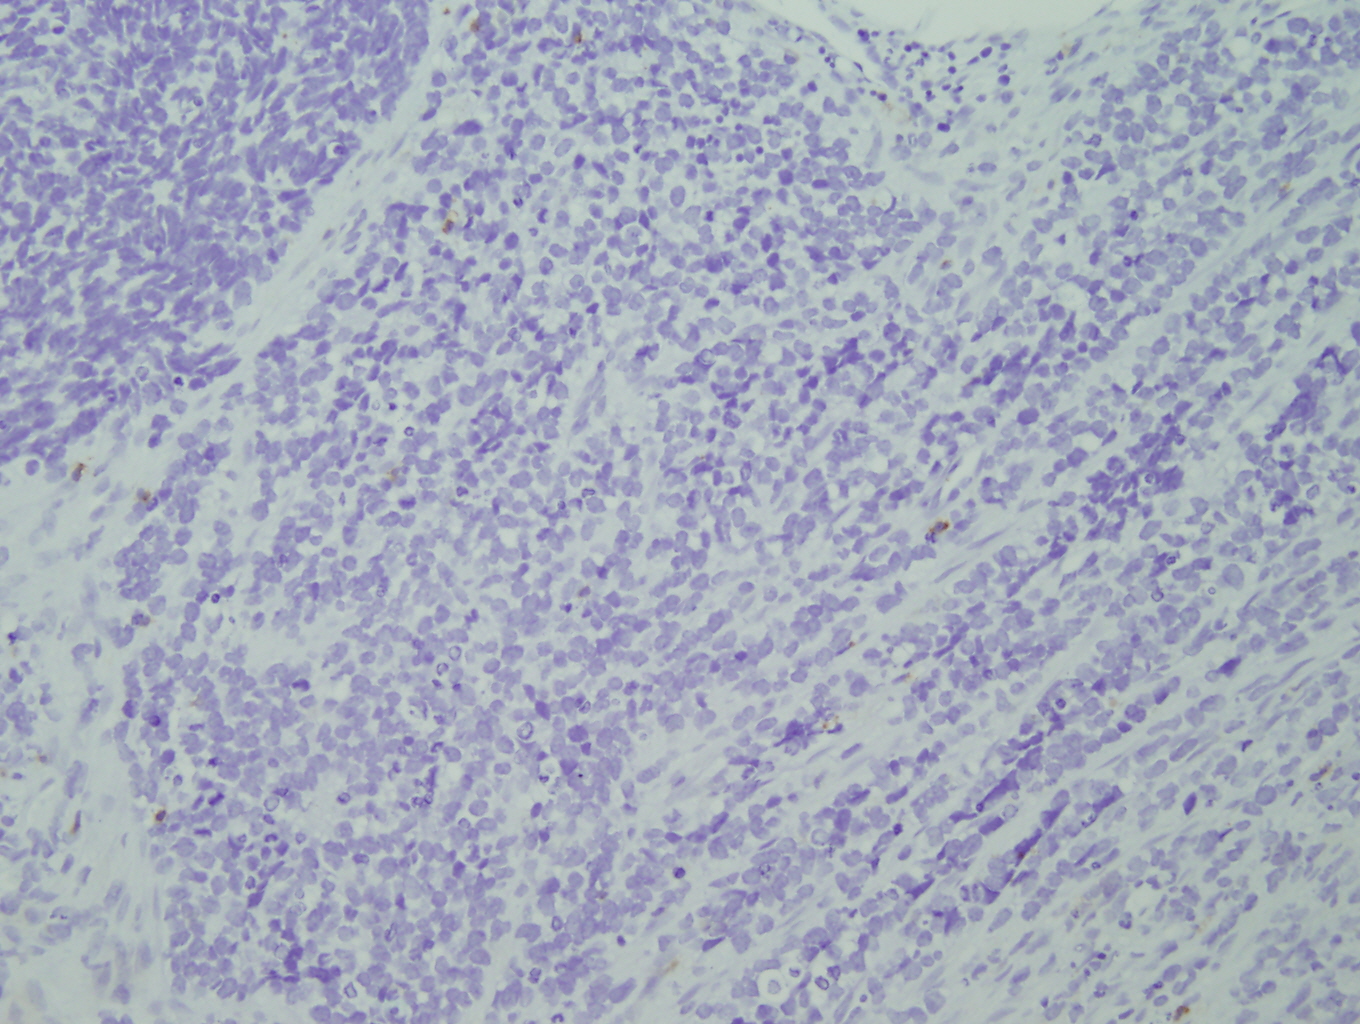 Microscopic image 5 - Biopsy from bone marrow, CD45 (Click to enlarge)